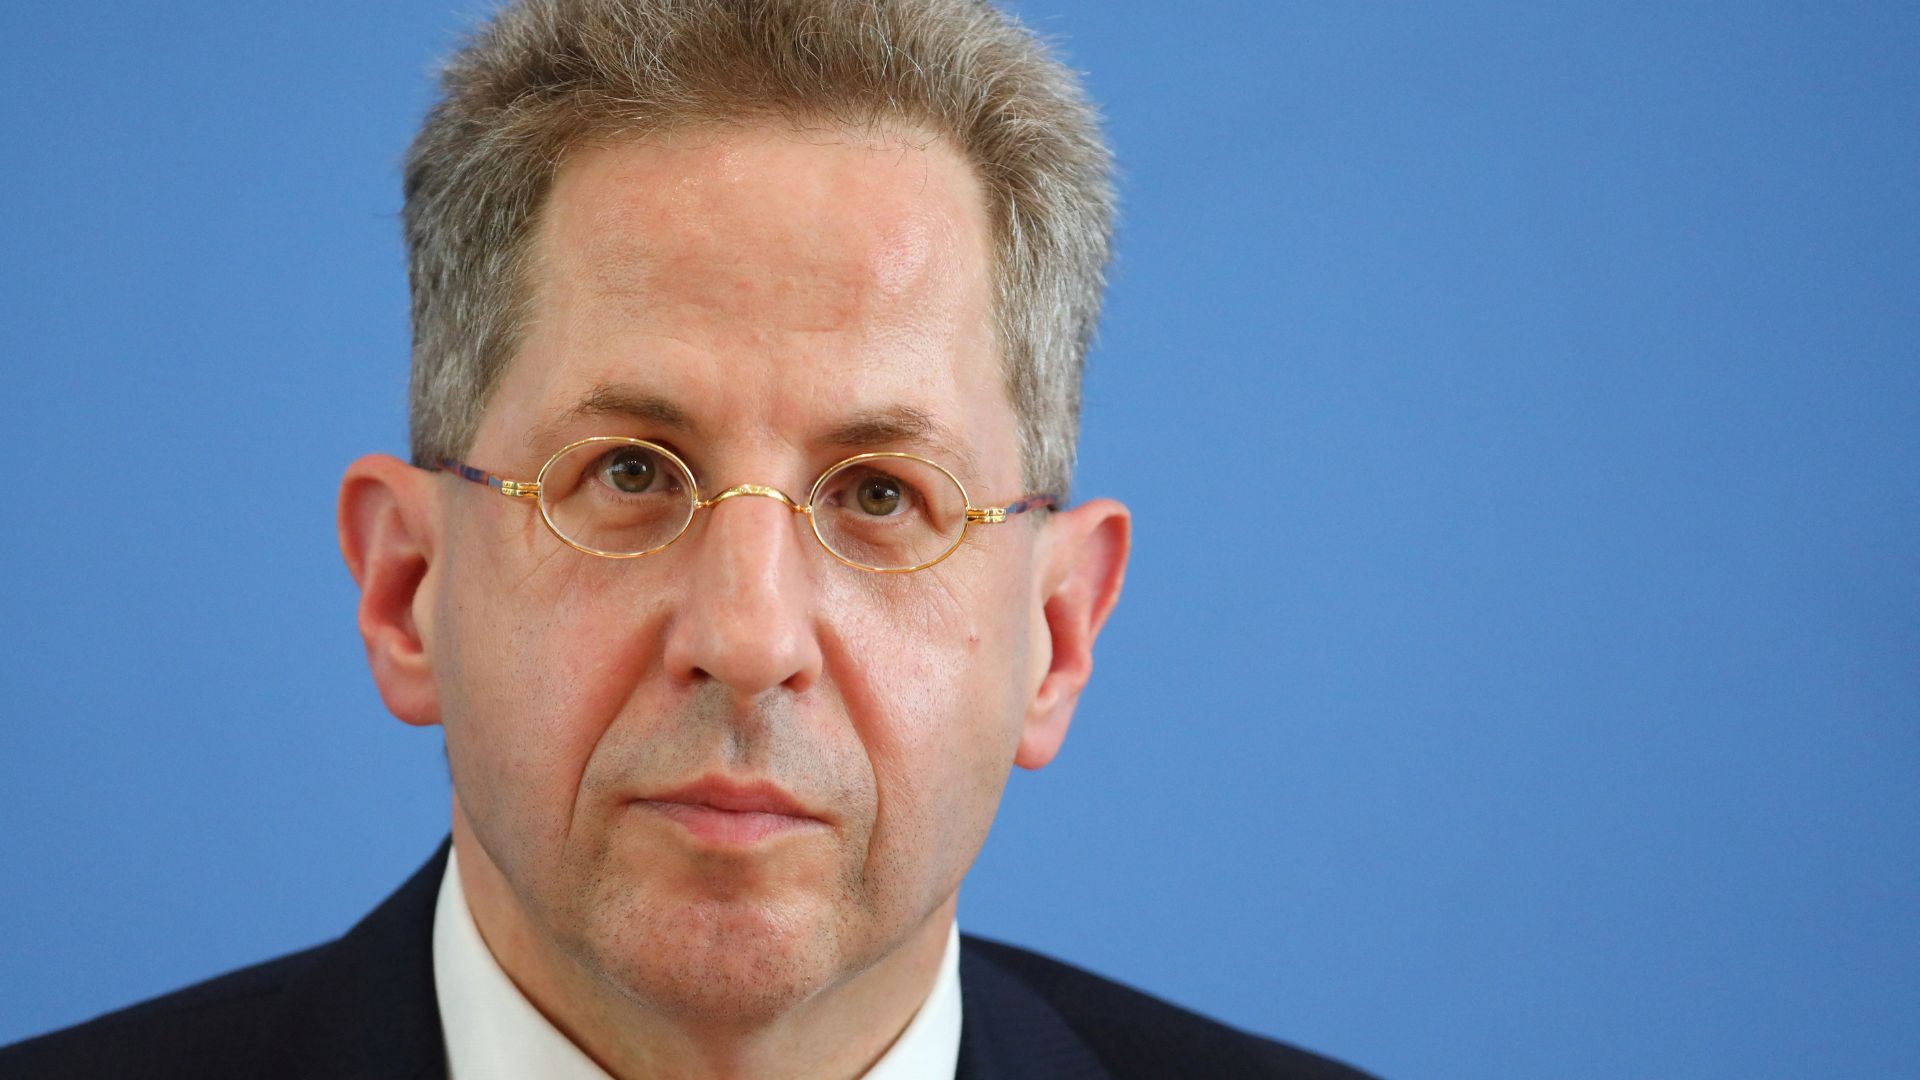 Hans Georg Maassen - the man previously in charge of rooting out extremism - is under investigation for that very crime./Hannibal Hanschke/Reuters